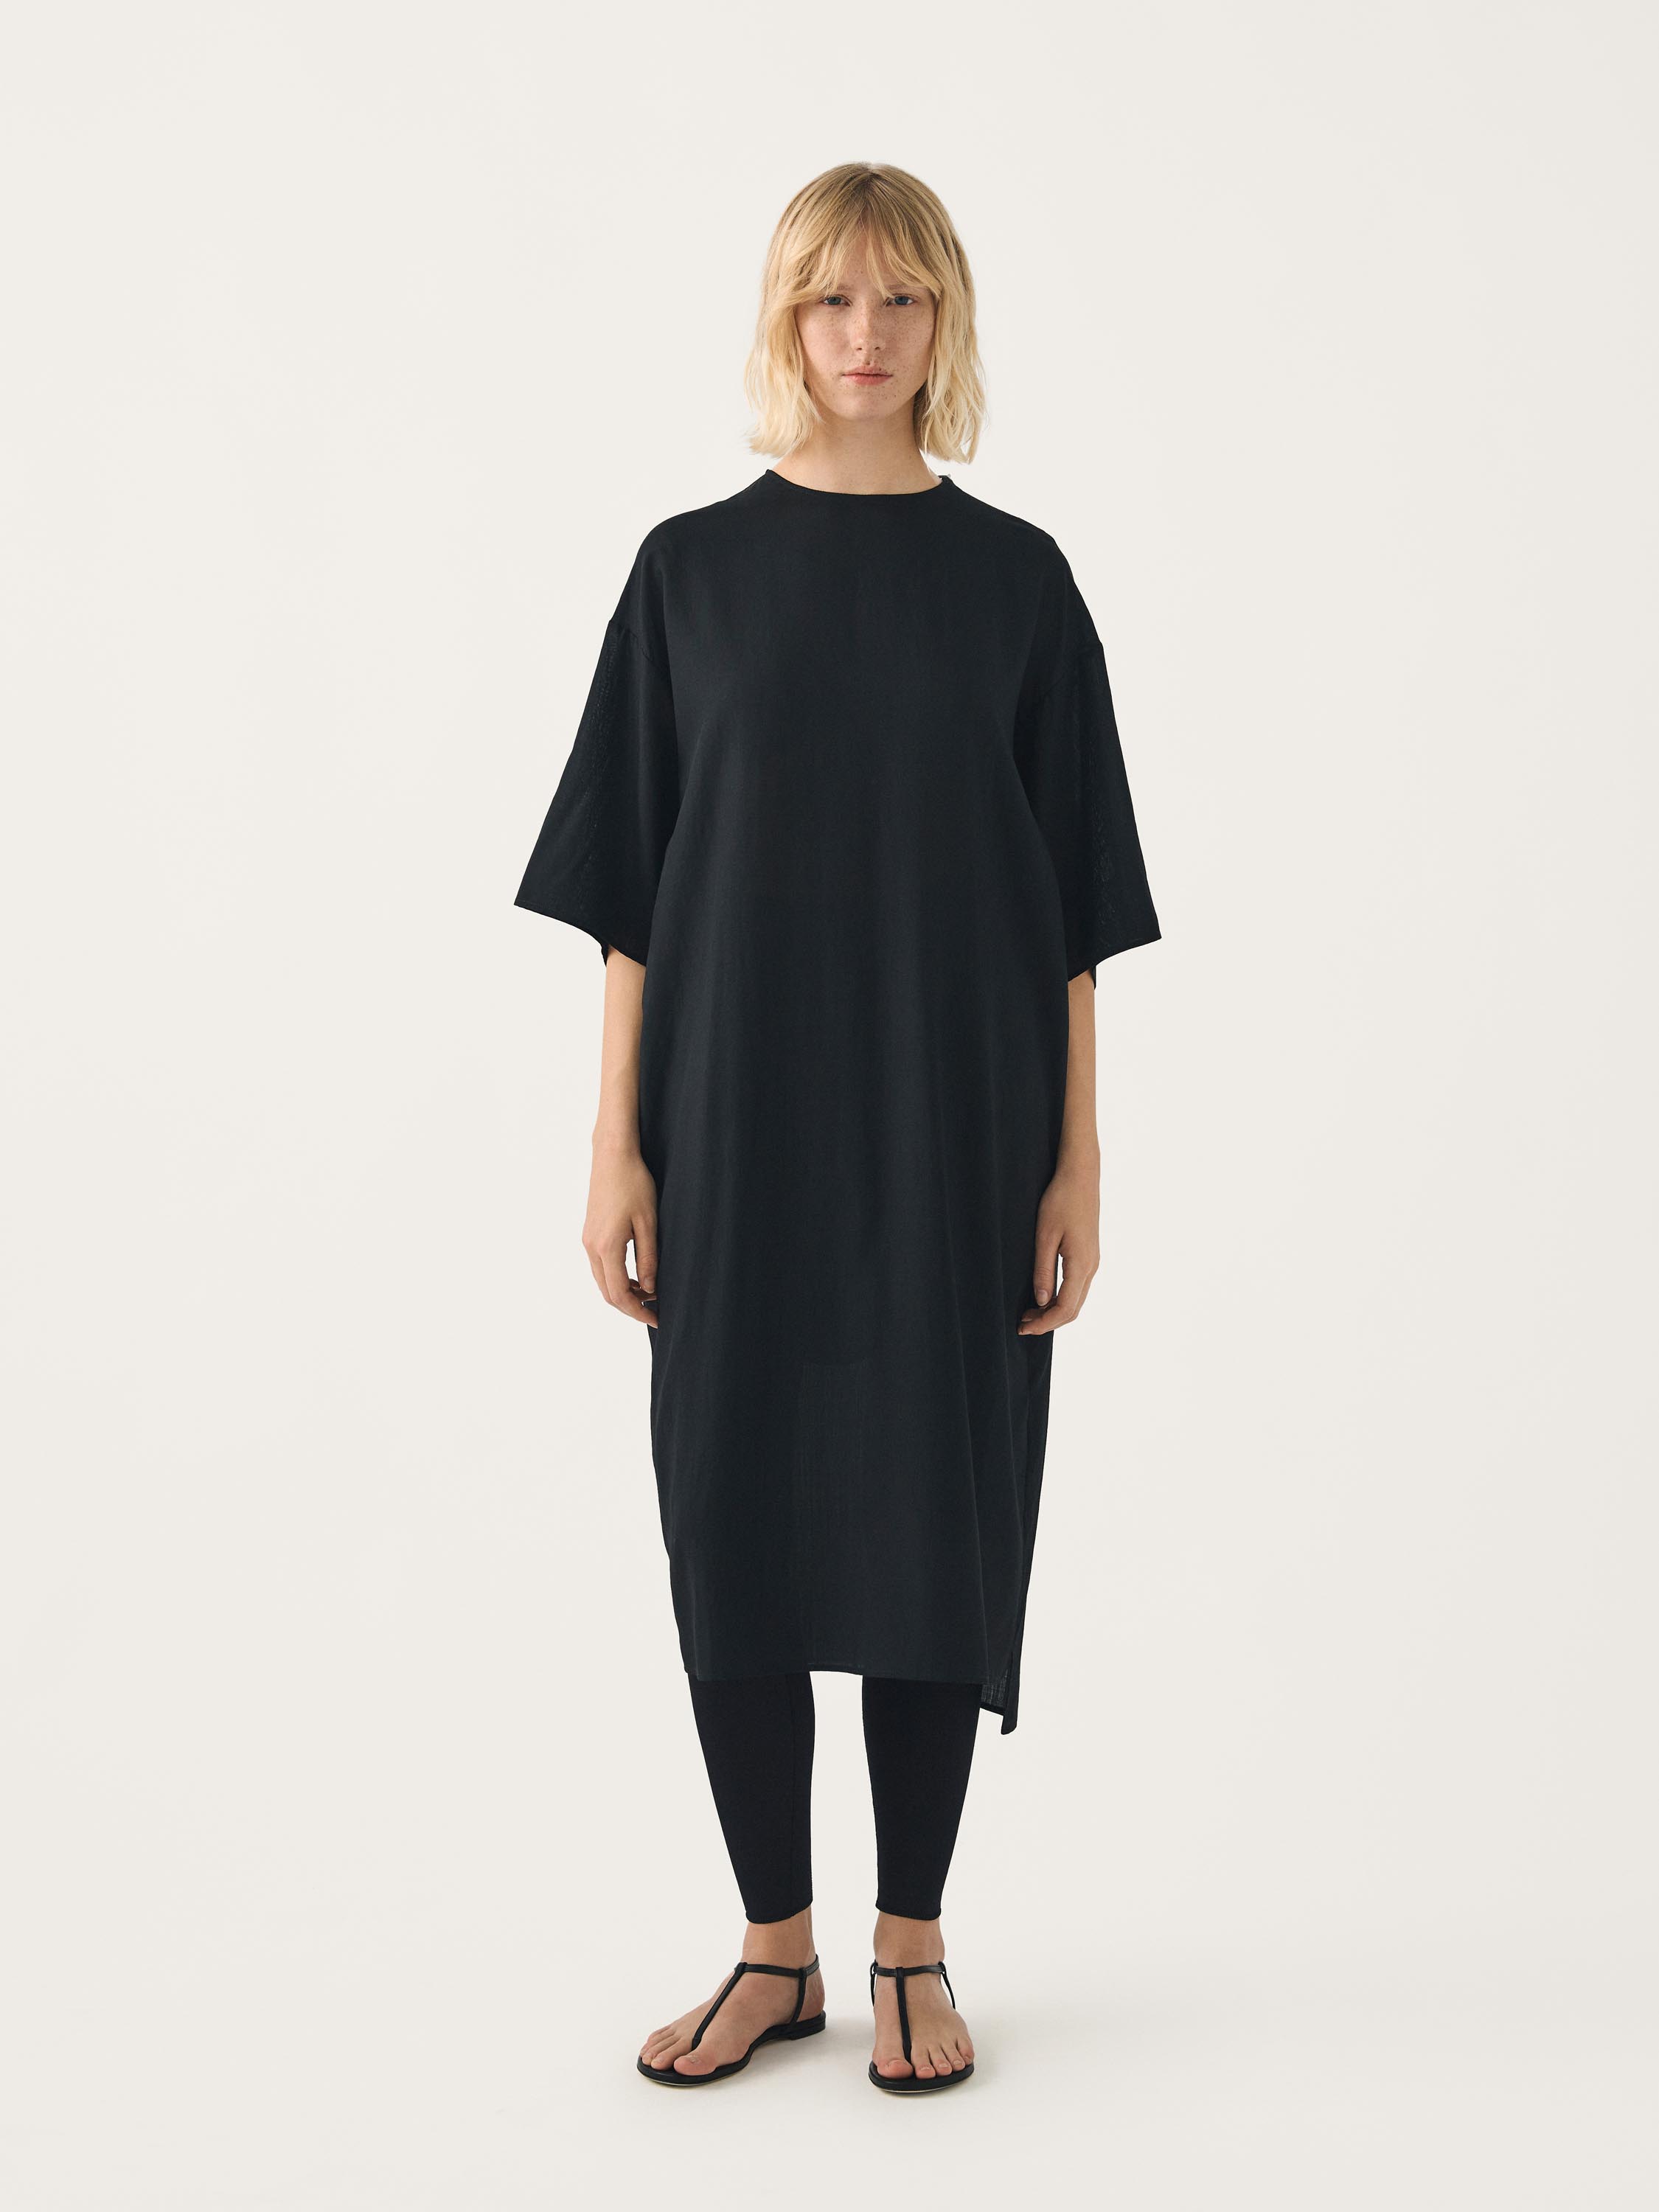 KEON woven dress sleeves | t-shirt elbow-length FFORME with